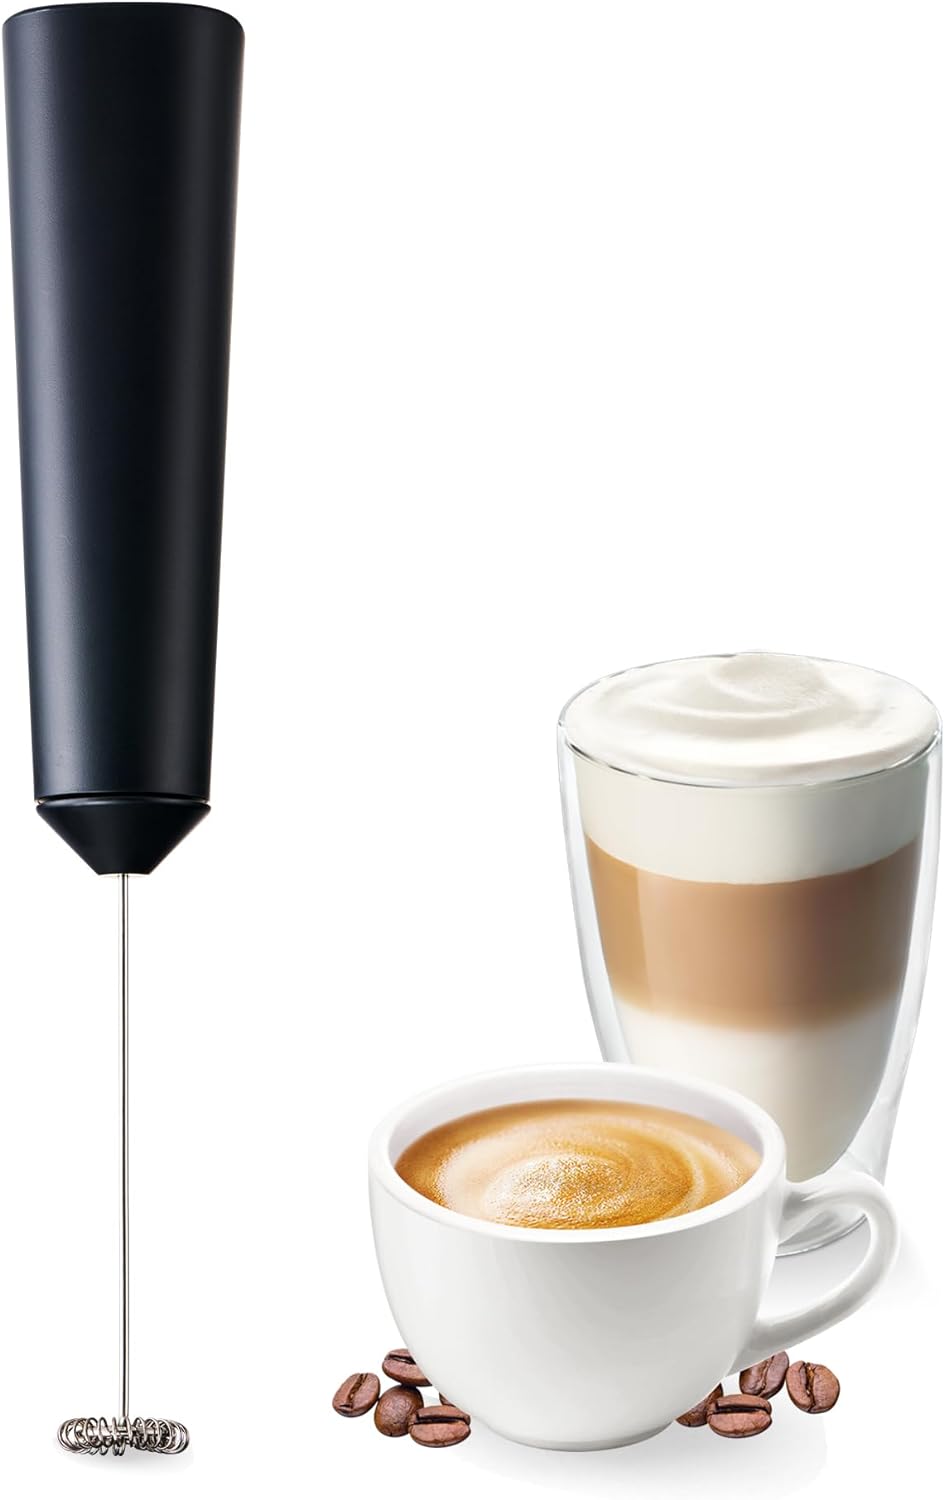 Tchibo Handheld Milk Frother Battery-Operated Dishwasher Safe Stainless Steel Whisk with Usb Charging Cable for Latte Macchiato, Cappuccino and Cocoa, Black